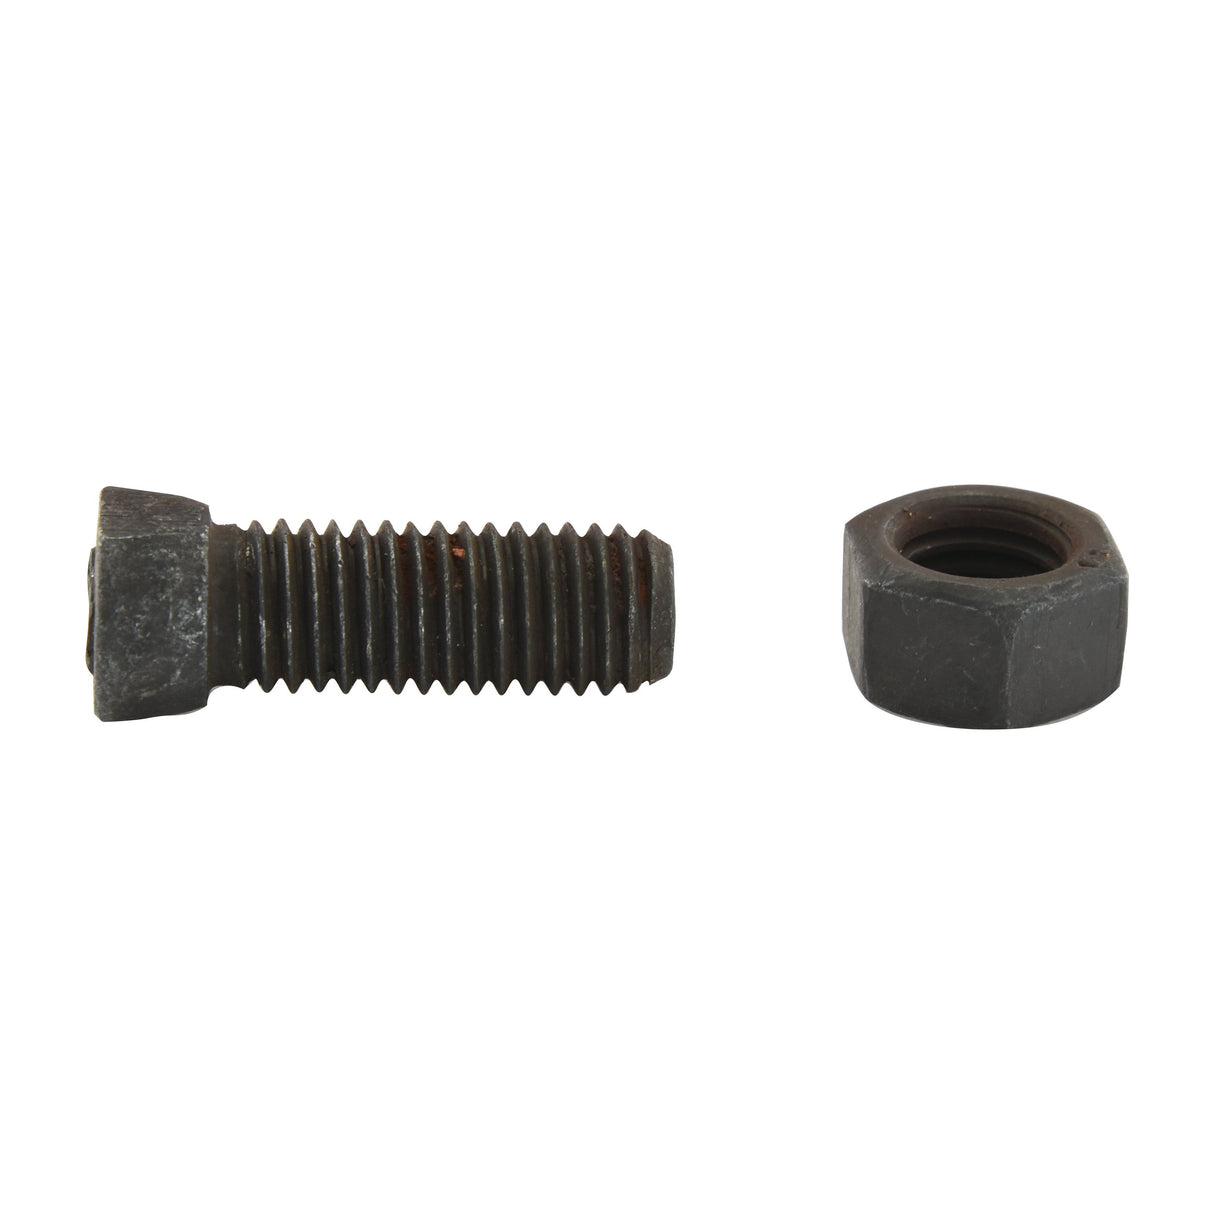 Conical Head Bolt 2 Flats With Nut (TC2M) - M12 x 34mm, Tensile strength 12.9 (25 pcs. Box)
 - S.78747 - Massey Tractor Parts